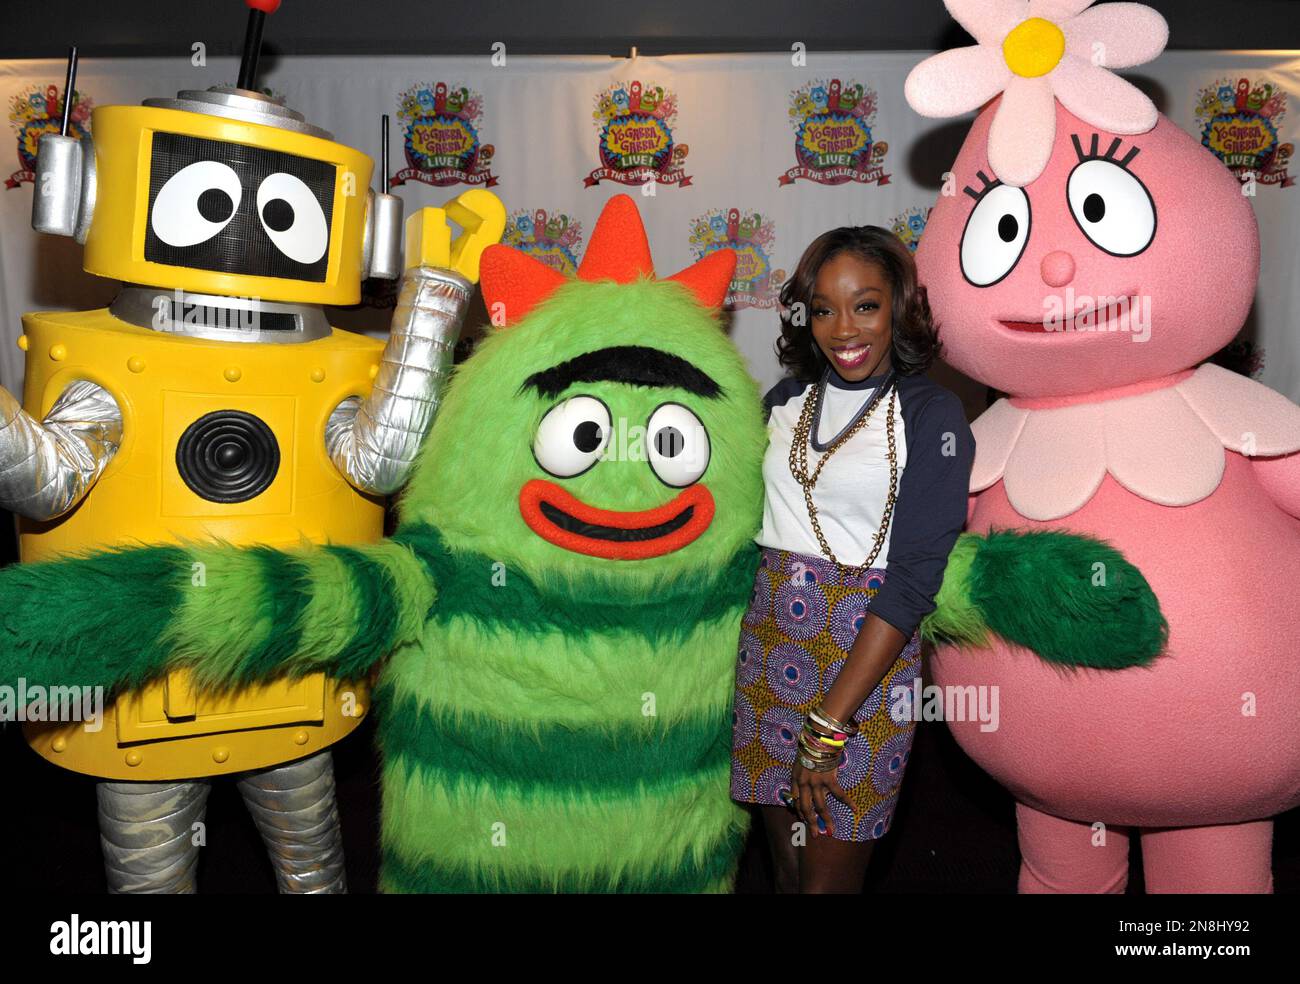 https://c8.alamy.com/comp/2N8HY92/estelle-swaray-2nd-from-right-poses-with-plex-brobee-and-foofa-at-yo-gabba-gabba!-live!-get-the-sillies-out!-50-city-tour-kick-off-performance-on-thanksgiving-weekend-at-nokia-theatre-la-live-on-friday-nov-23-2012-in-los-angeles-photo-by-john-shearerinvision-for-gabbacadabra-llcap-images-2N8HY92.jpg